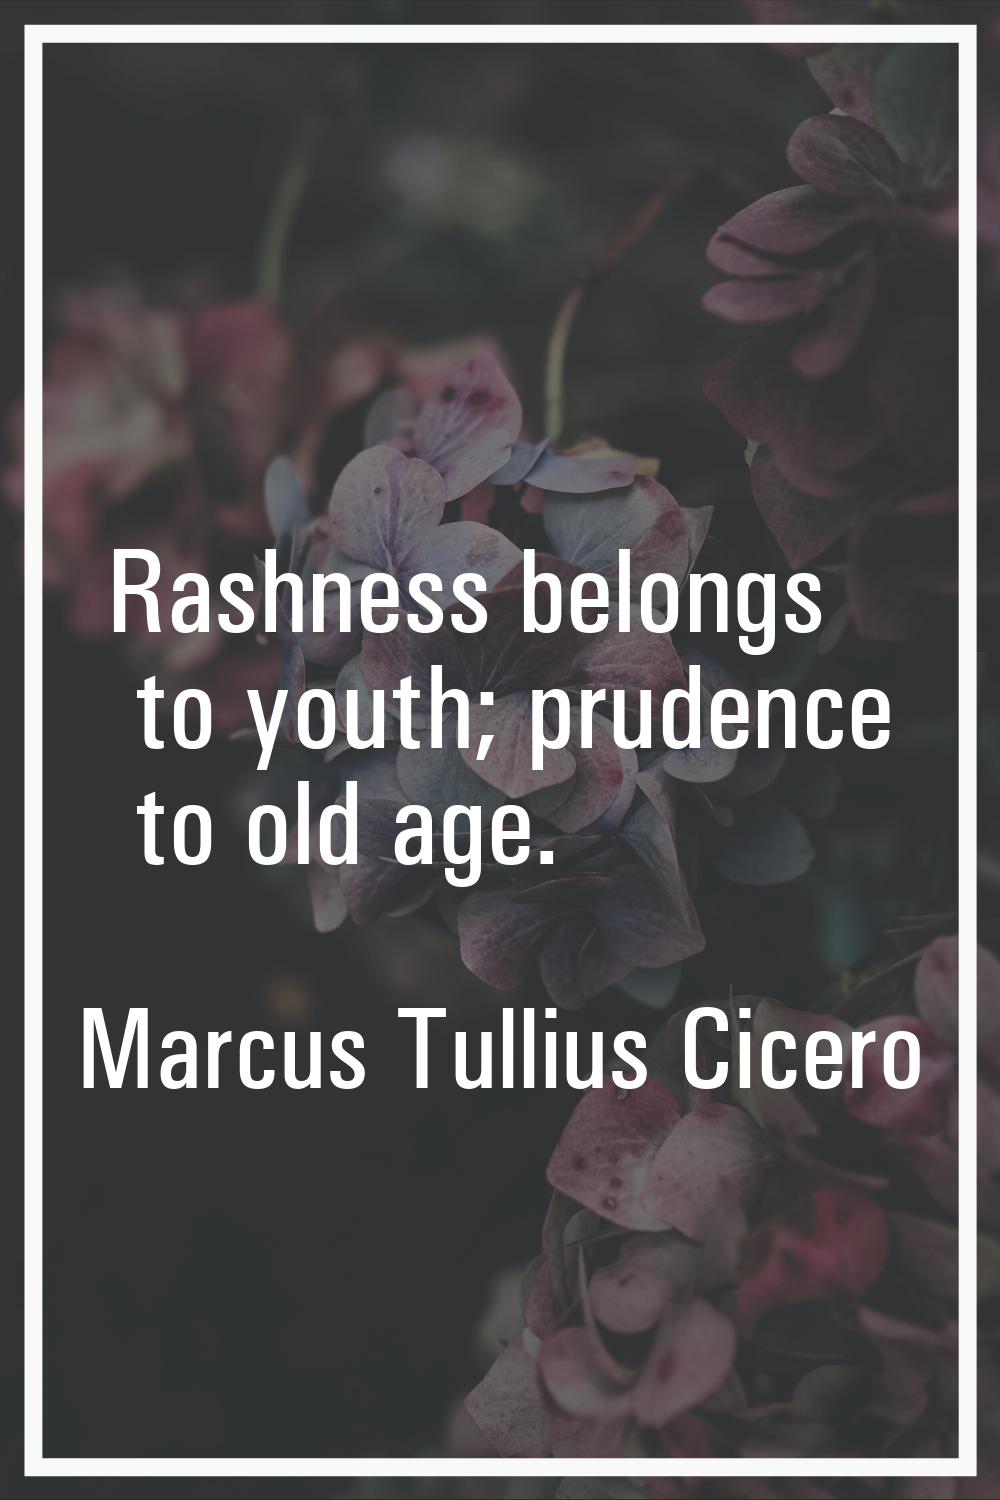 Rashness belongs to youth; prudence to old age.